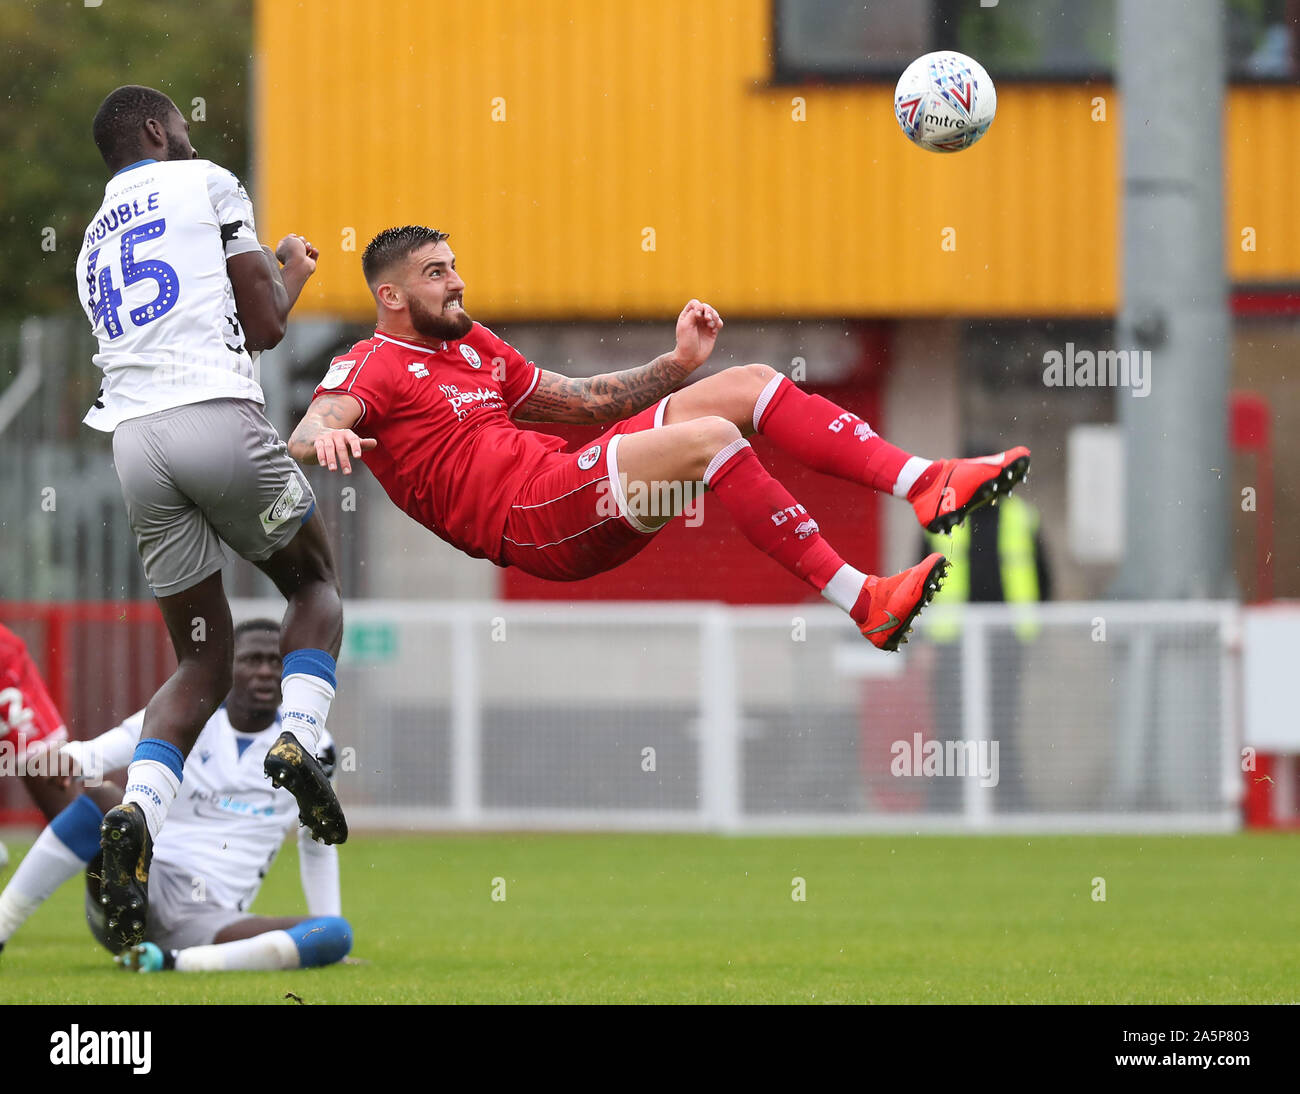 Crawley, UK. 12 October 2019 Crawley Town's Tom Dallison tries an overhead kick during the Sky Bet League Two match between Crawley Town and Colchester United at the Peoples Pension Stadium in Crawley. Credit: Telephoto Images / Alamy Live News Stock Photo